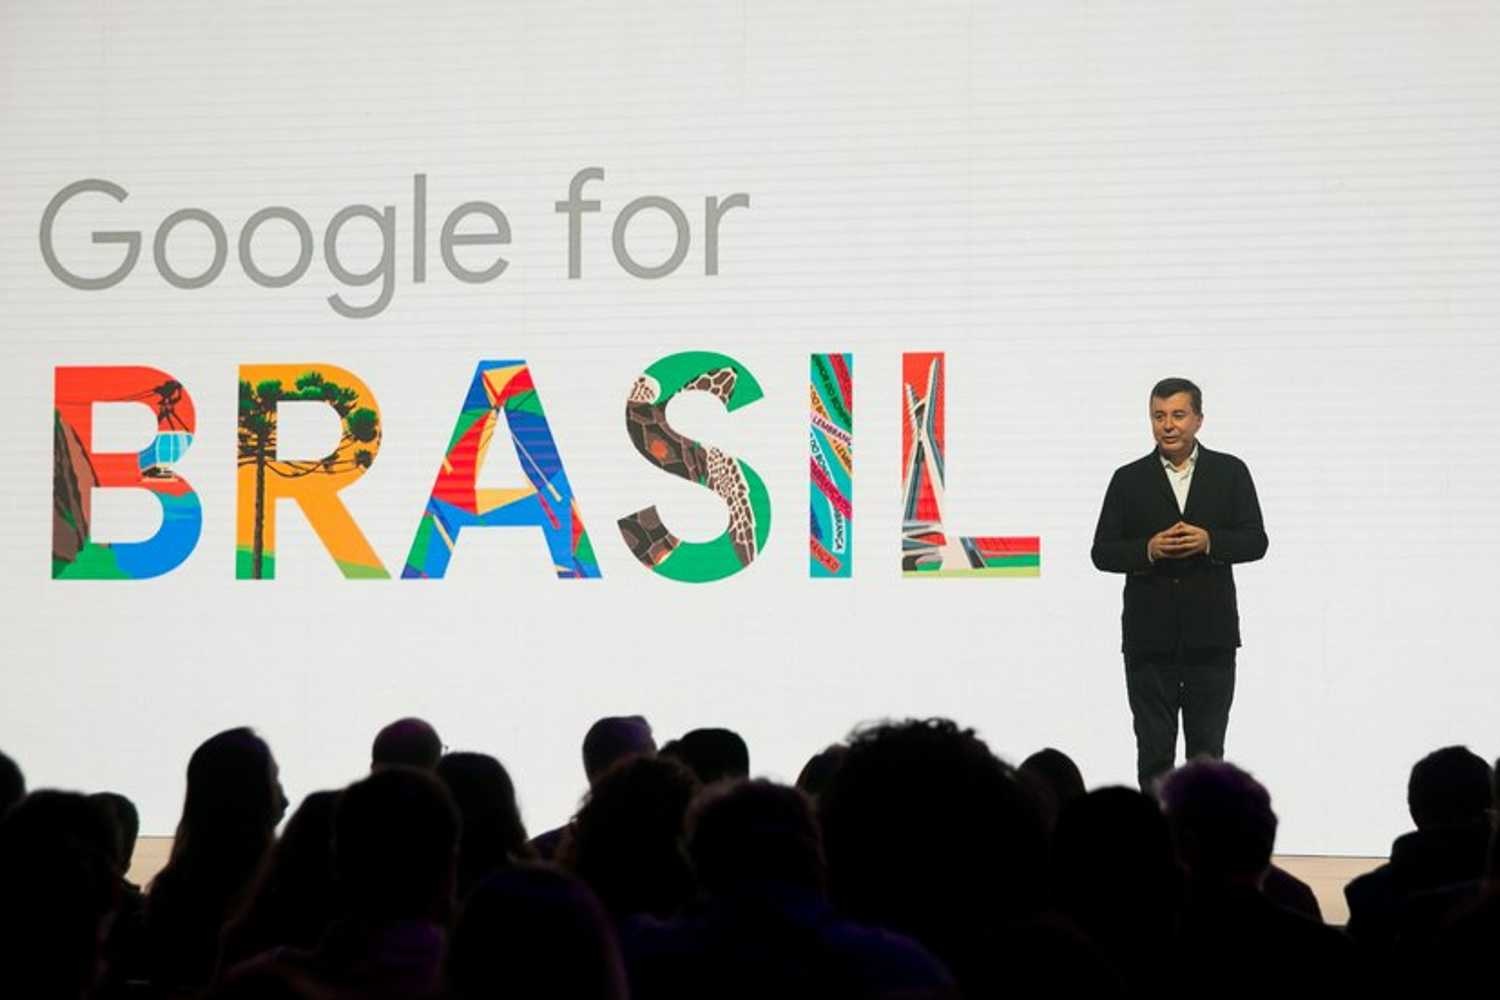 According to Fábio Coelho, Google's new Engineering Center in São Paulo will be inaugurated by the end of 2024 and will be able to accommodate up to 400 professionals.